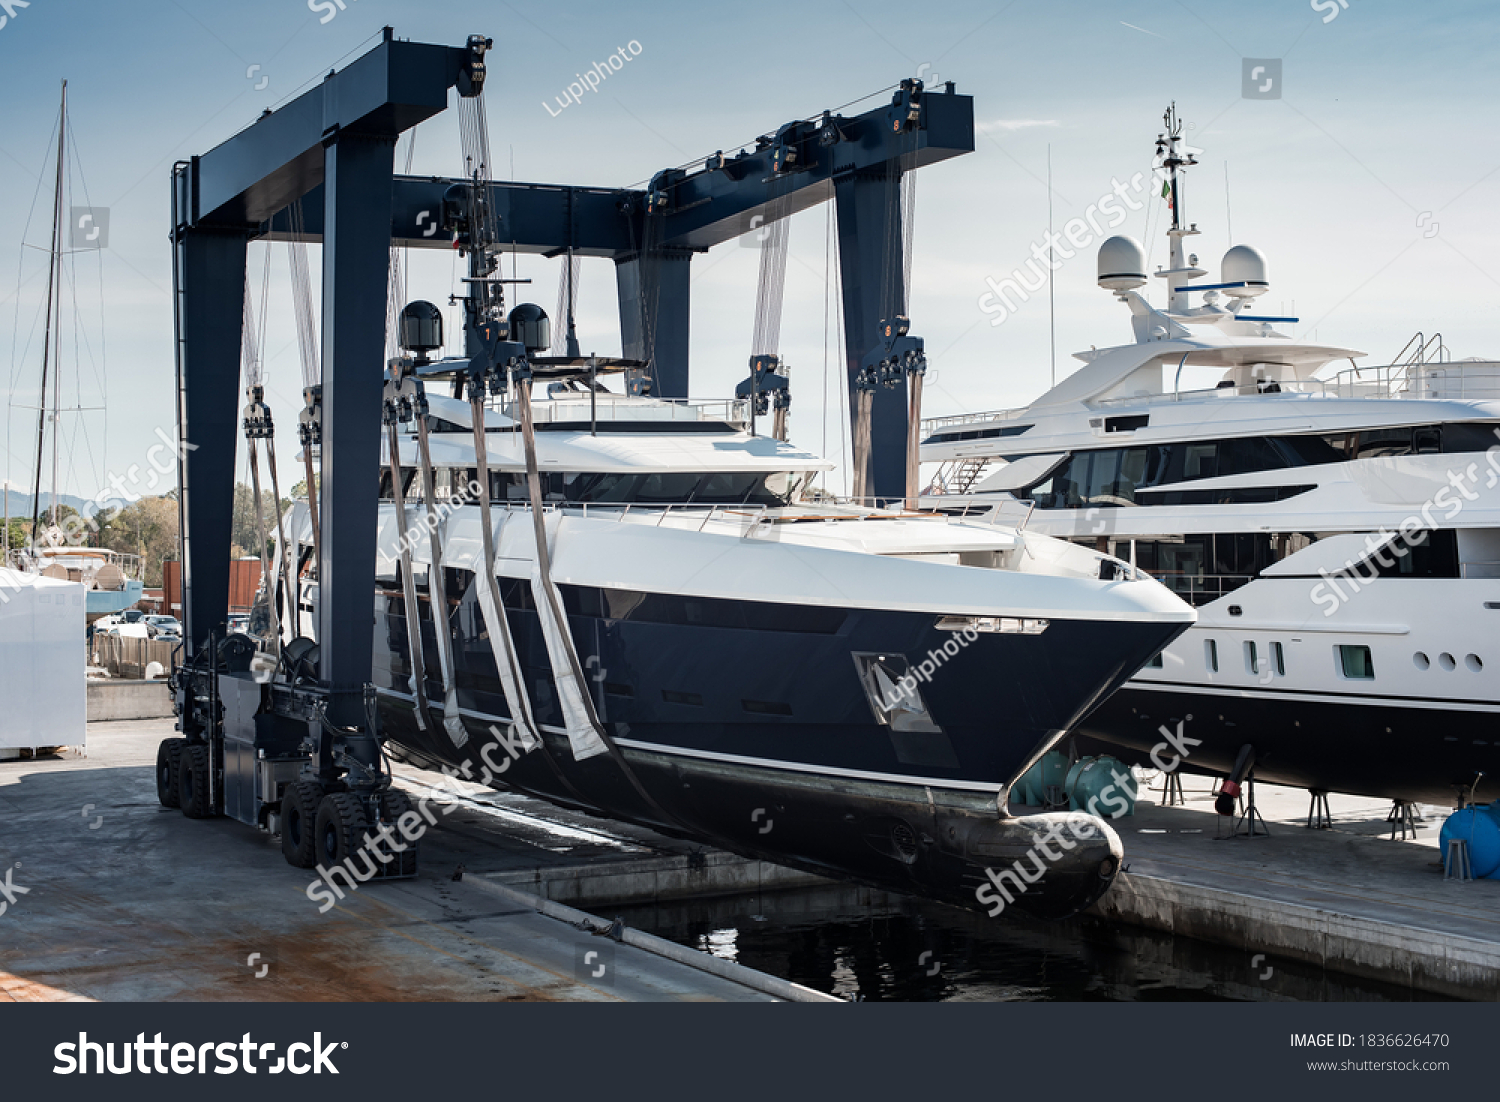 Super Yacht hauled out in shipyard, being lifted by industrial crane for refit or maintenance yard period  #1836626470